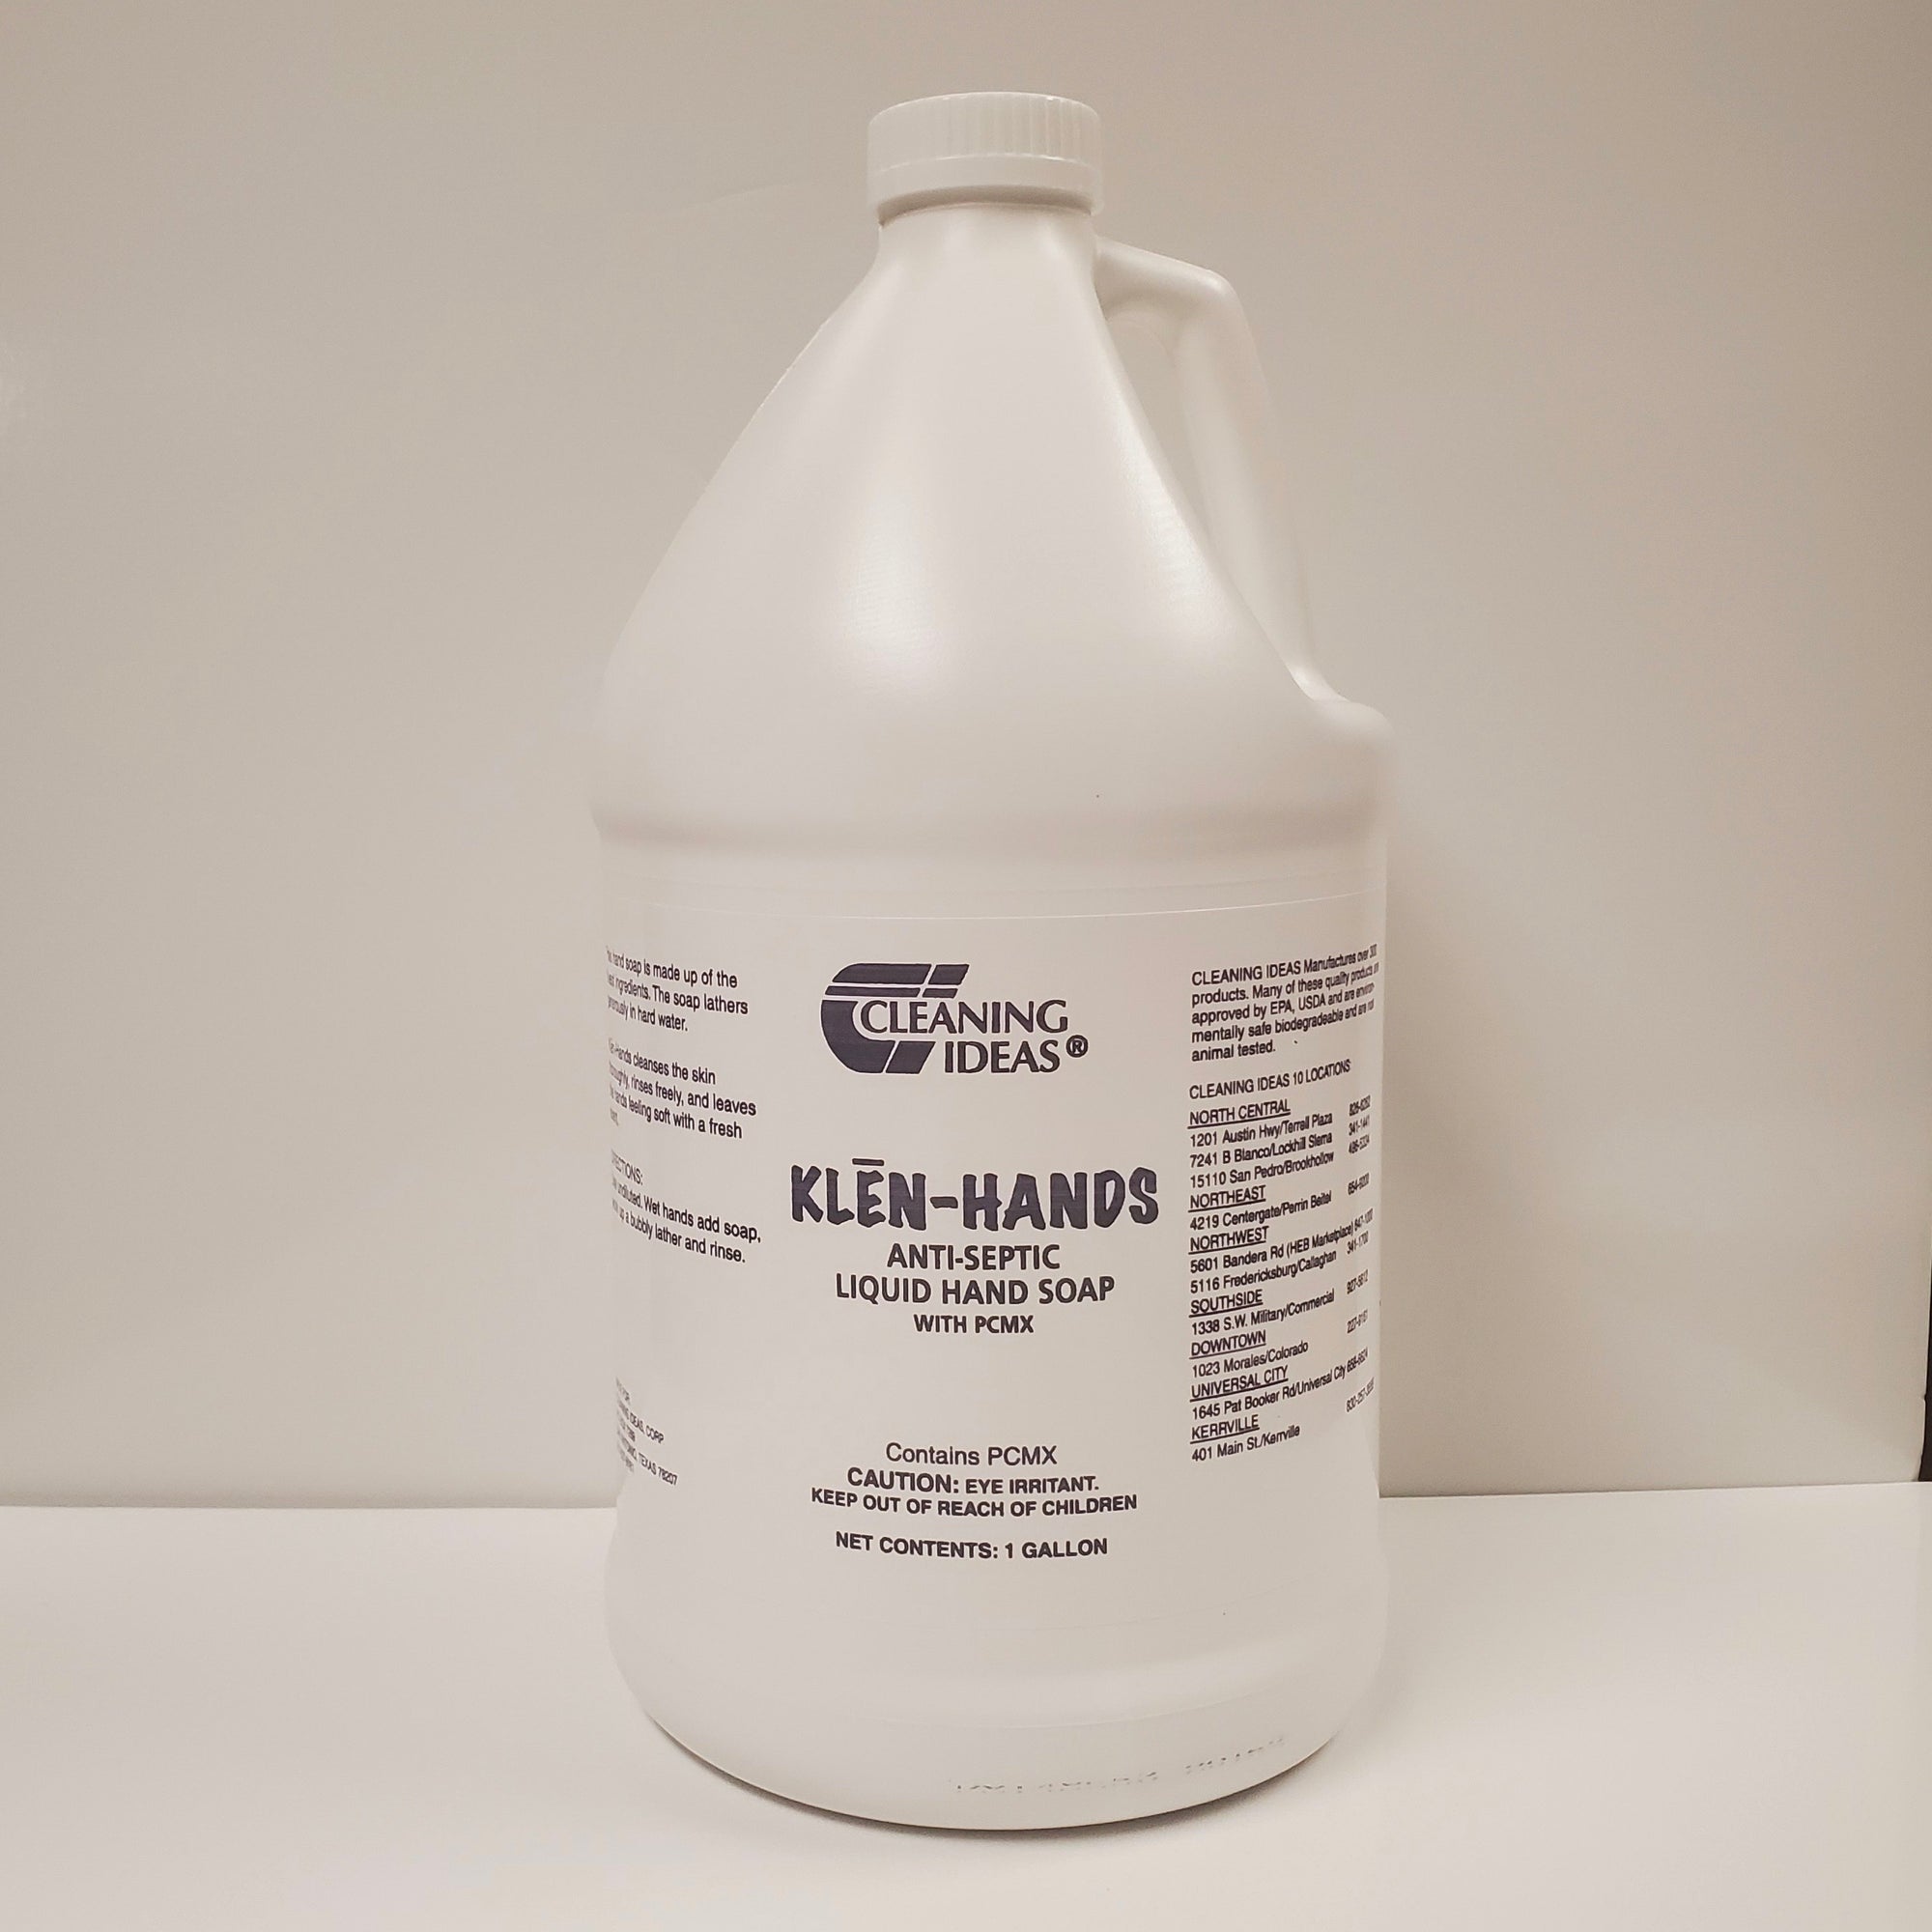 Klen-Hands Anti-Septic Hand Soap - Cleaning Ideas 